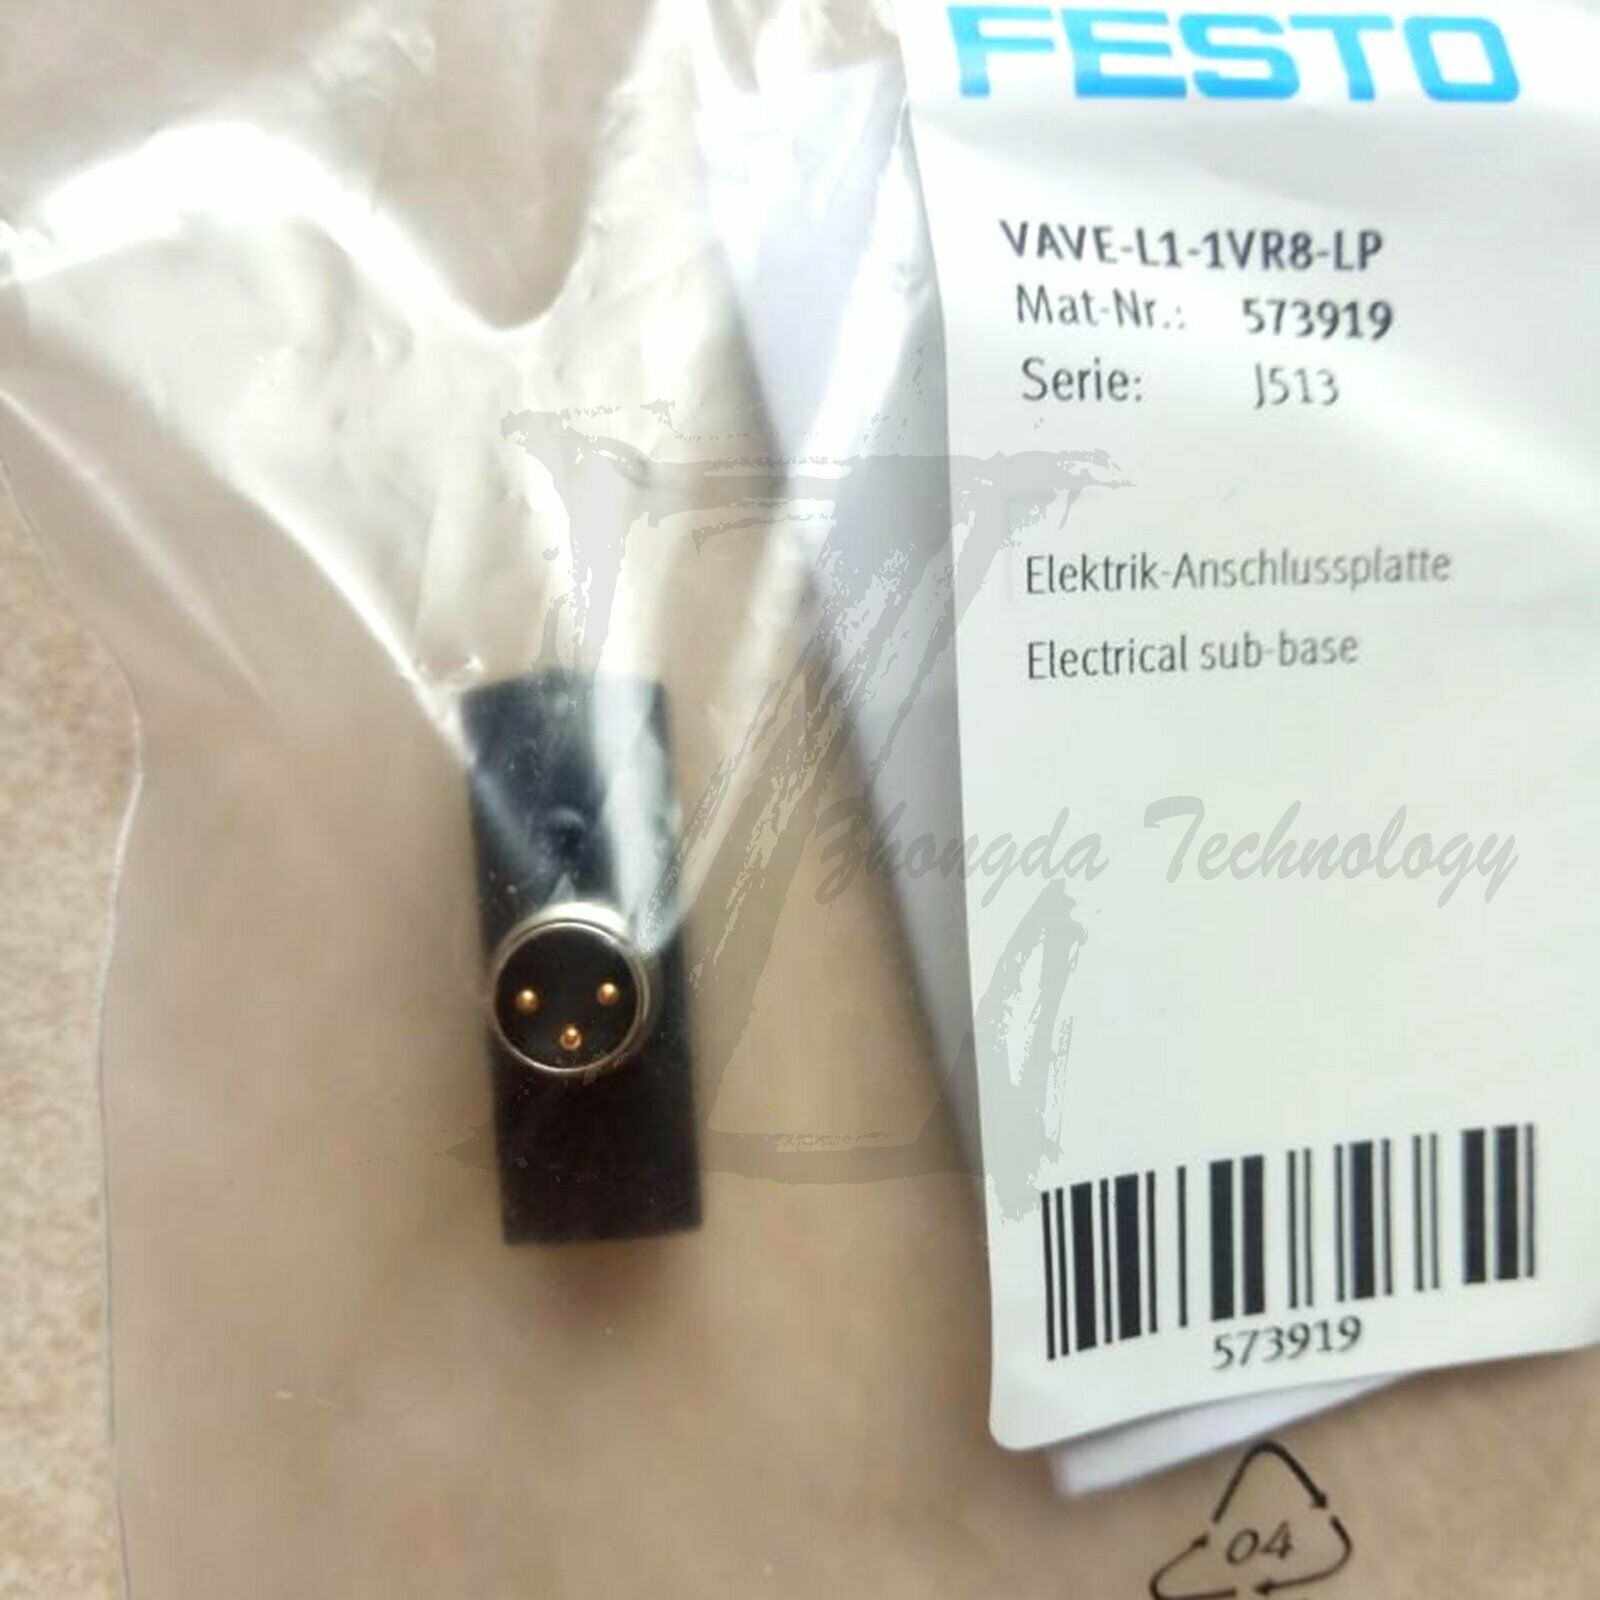 1PC NEW Festo Electrical connection base VAVE-L1-1VR8-LP 573919 KOEED 1, 80%, FESTO, import_2020_10_10_031751, Other